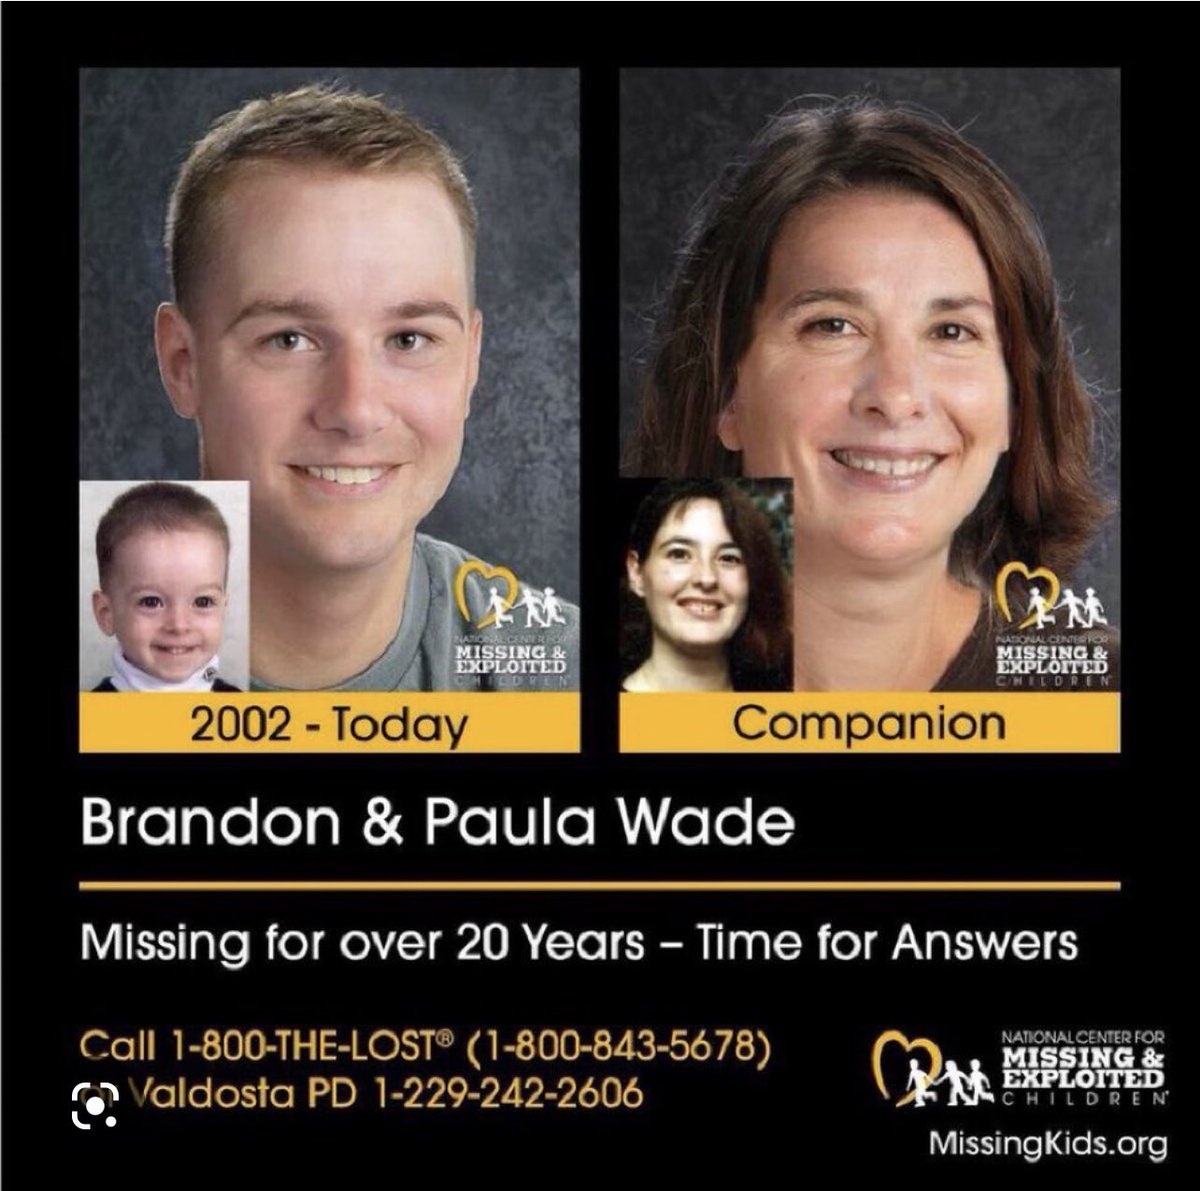 PLS RT! #Missing #PaulaWade & #BrandonWade. Mother & son are STILL missing from #Valdosta #Georgia since October 2002. Help find this family the answers they deserve. #SeeSomethingSaySomething #MissingPerson #MissingPersons #HappyNewYear2023